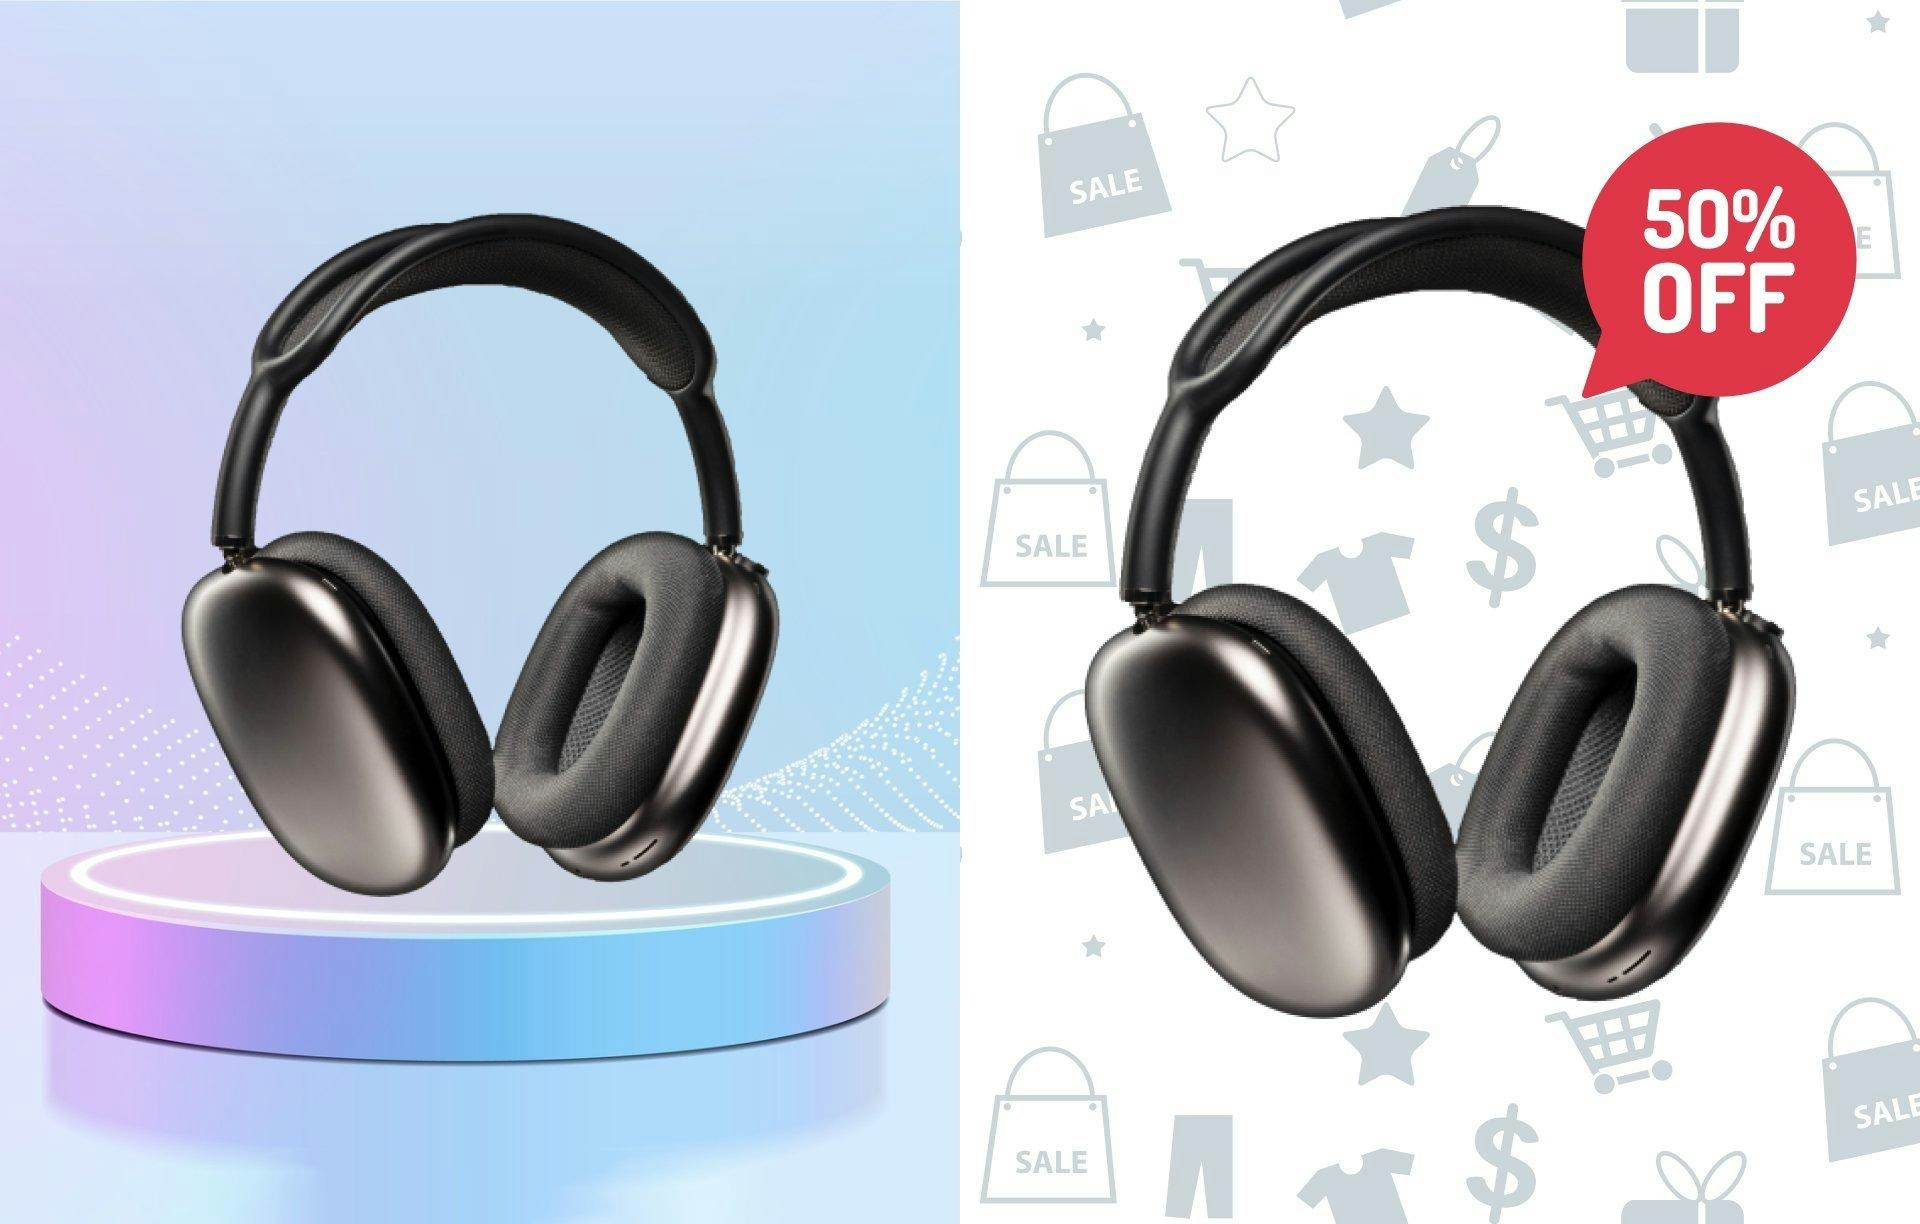 before and after image of a pair of headphones when repurposed for a sale